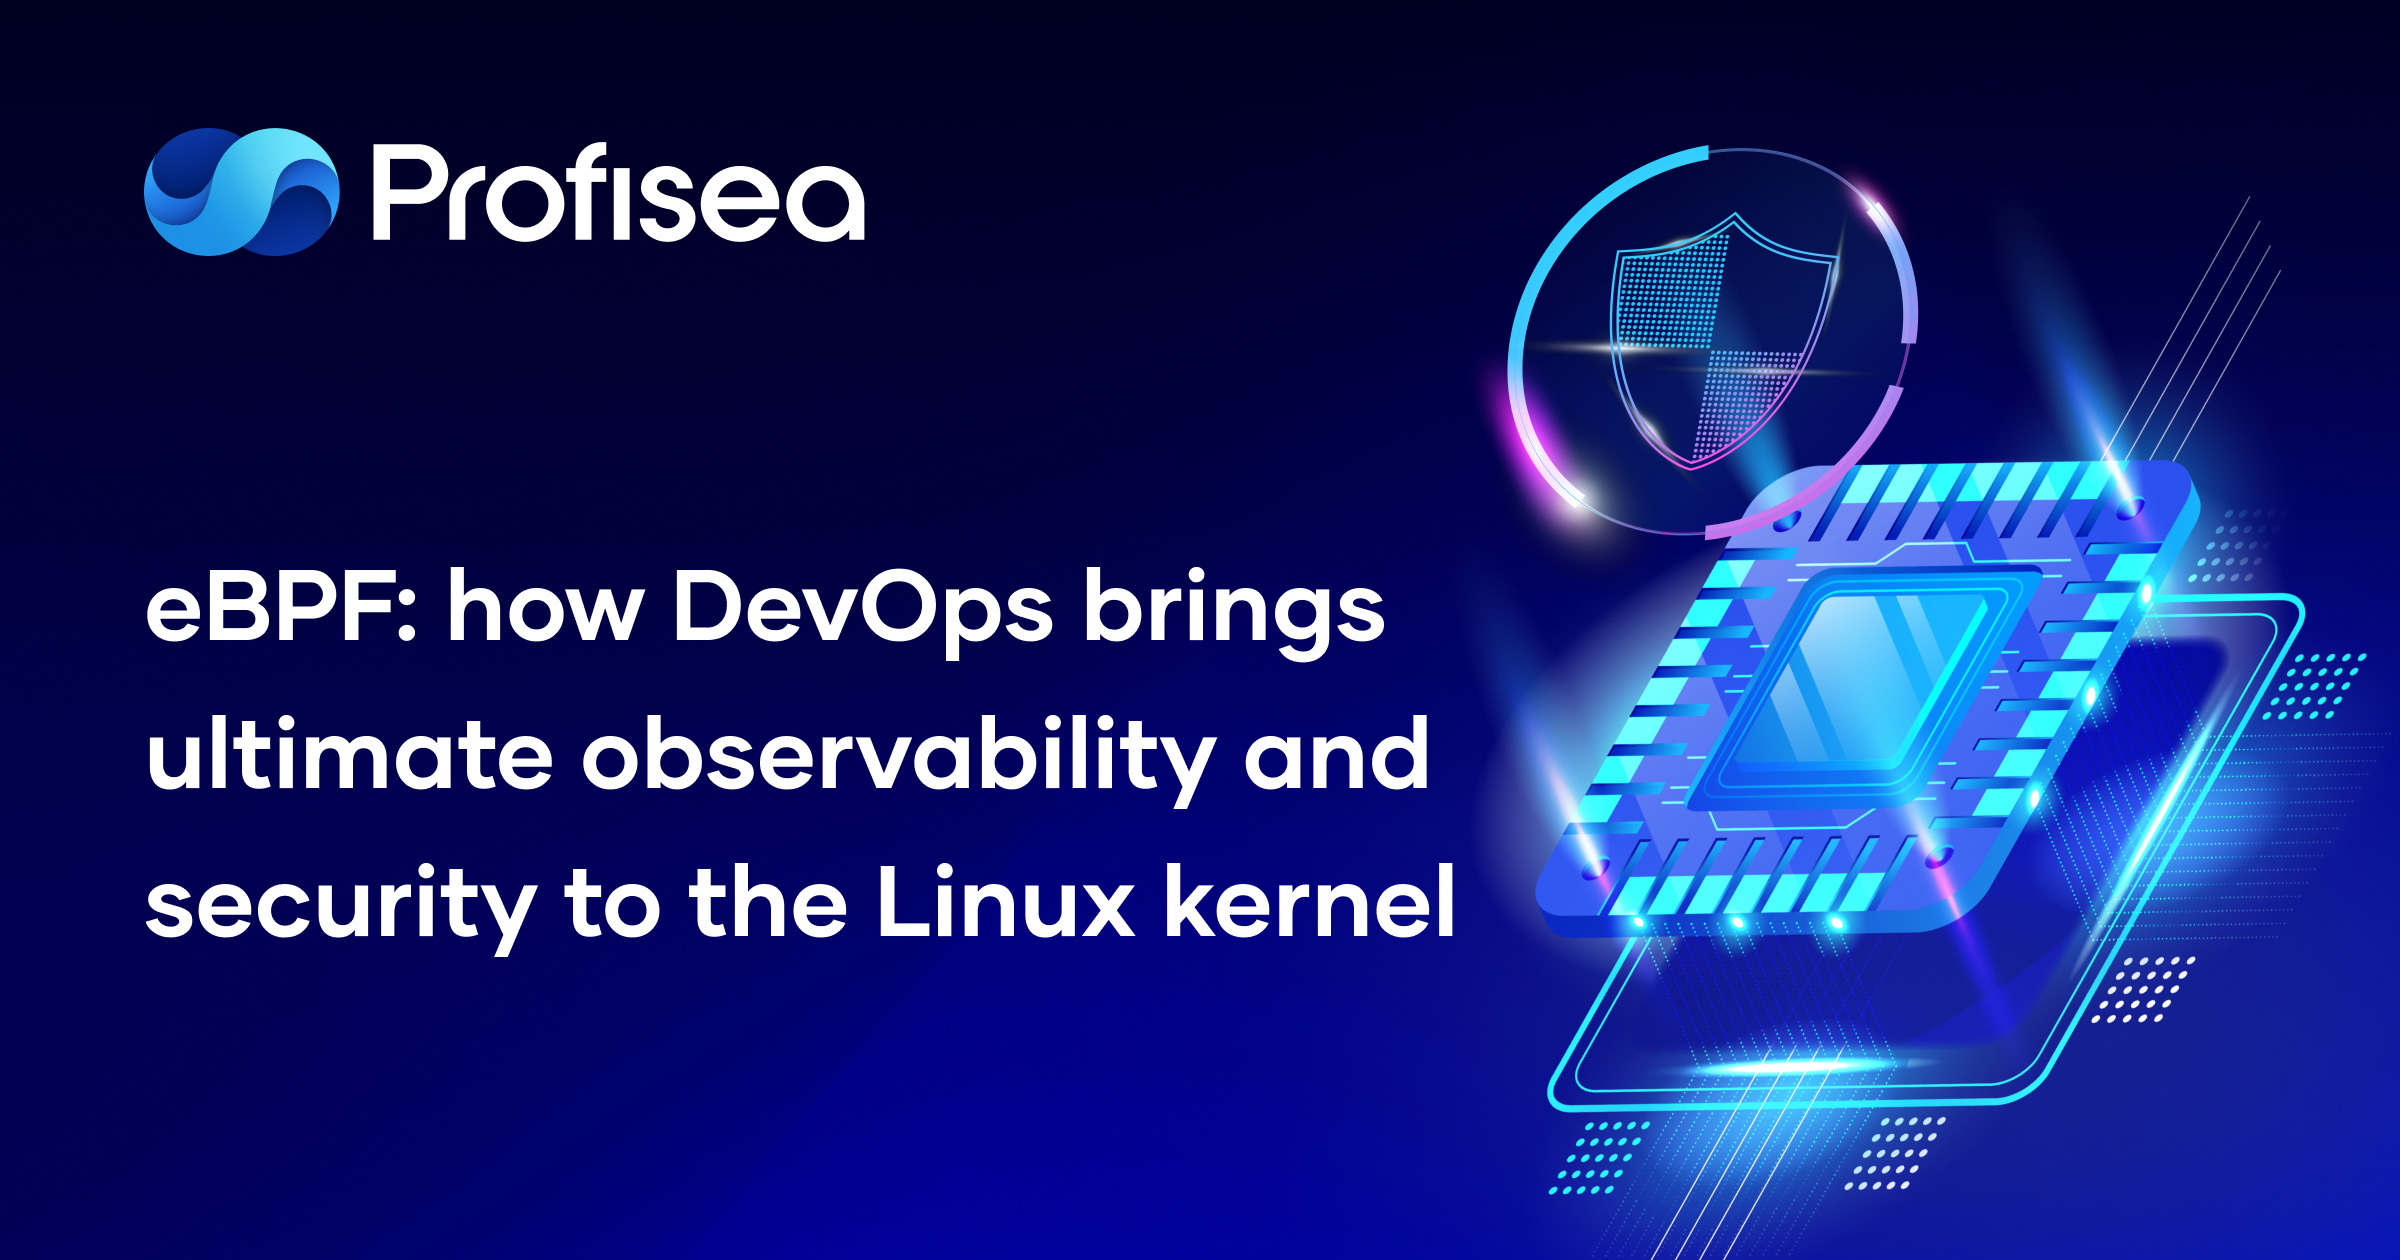 eBPF: how DevOps brings ultimate observability and security to the Linux kernel